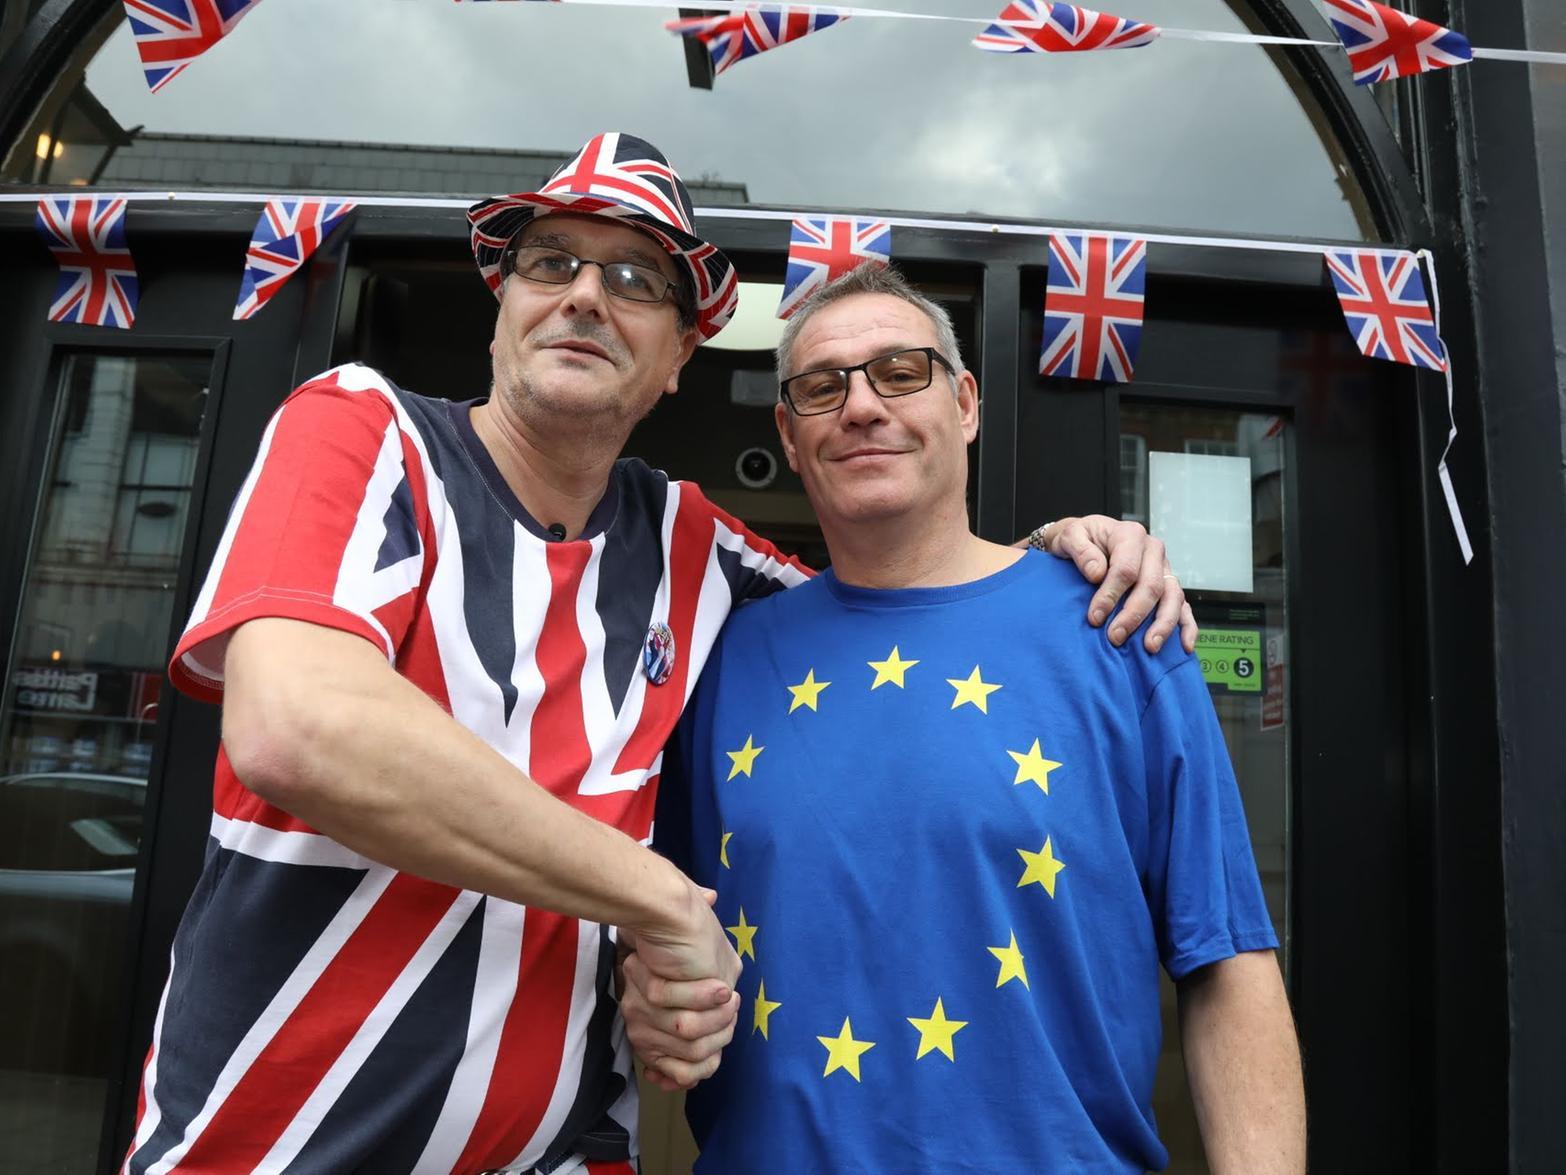 Rising Sun manager Dave Cooper with Remainer Richard Hughes.